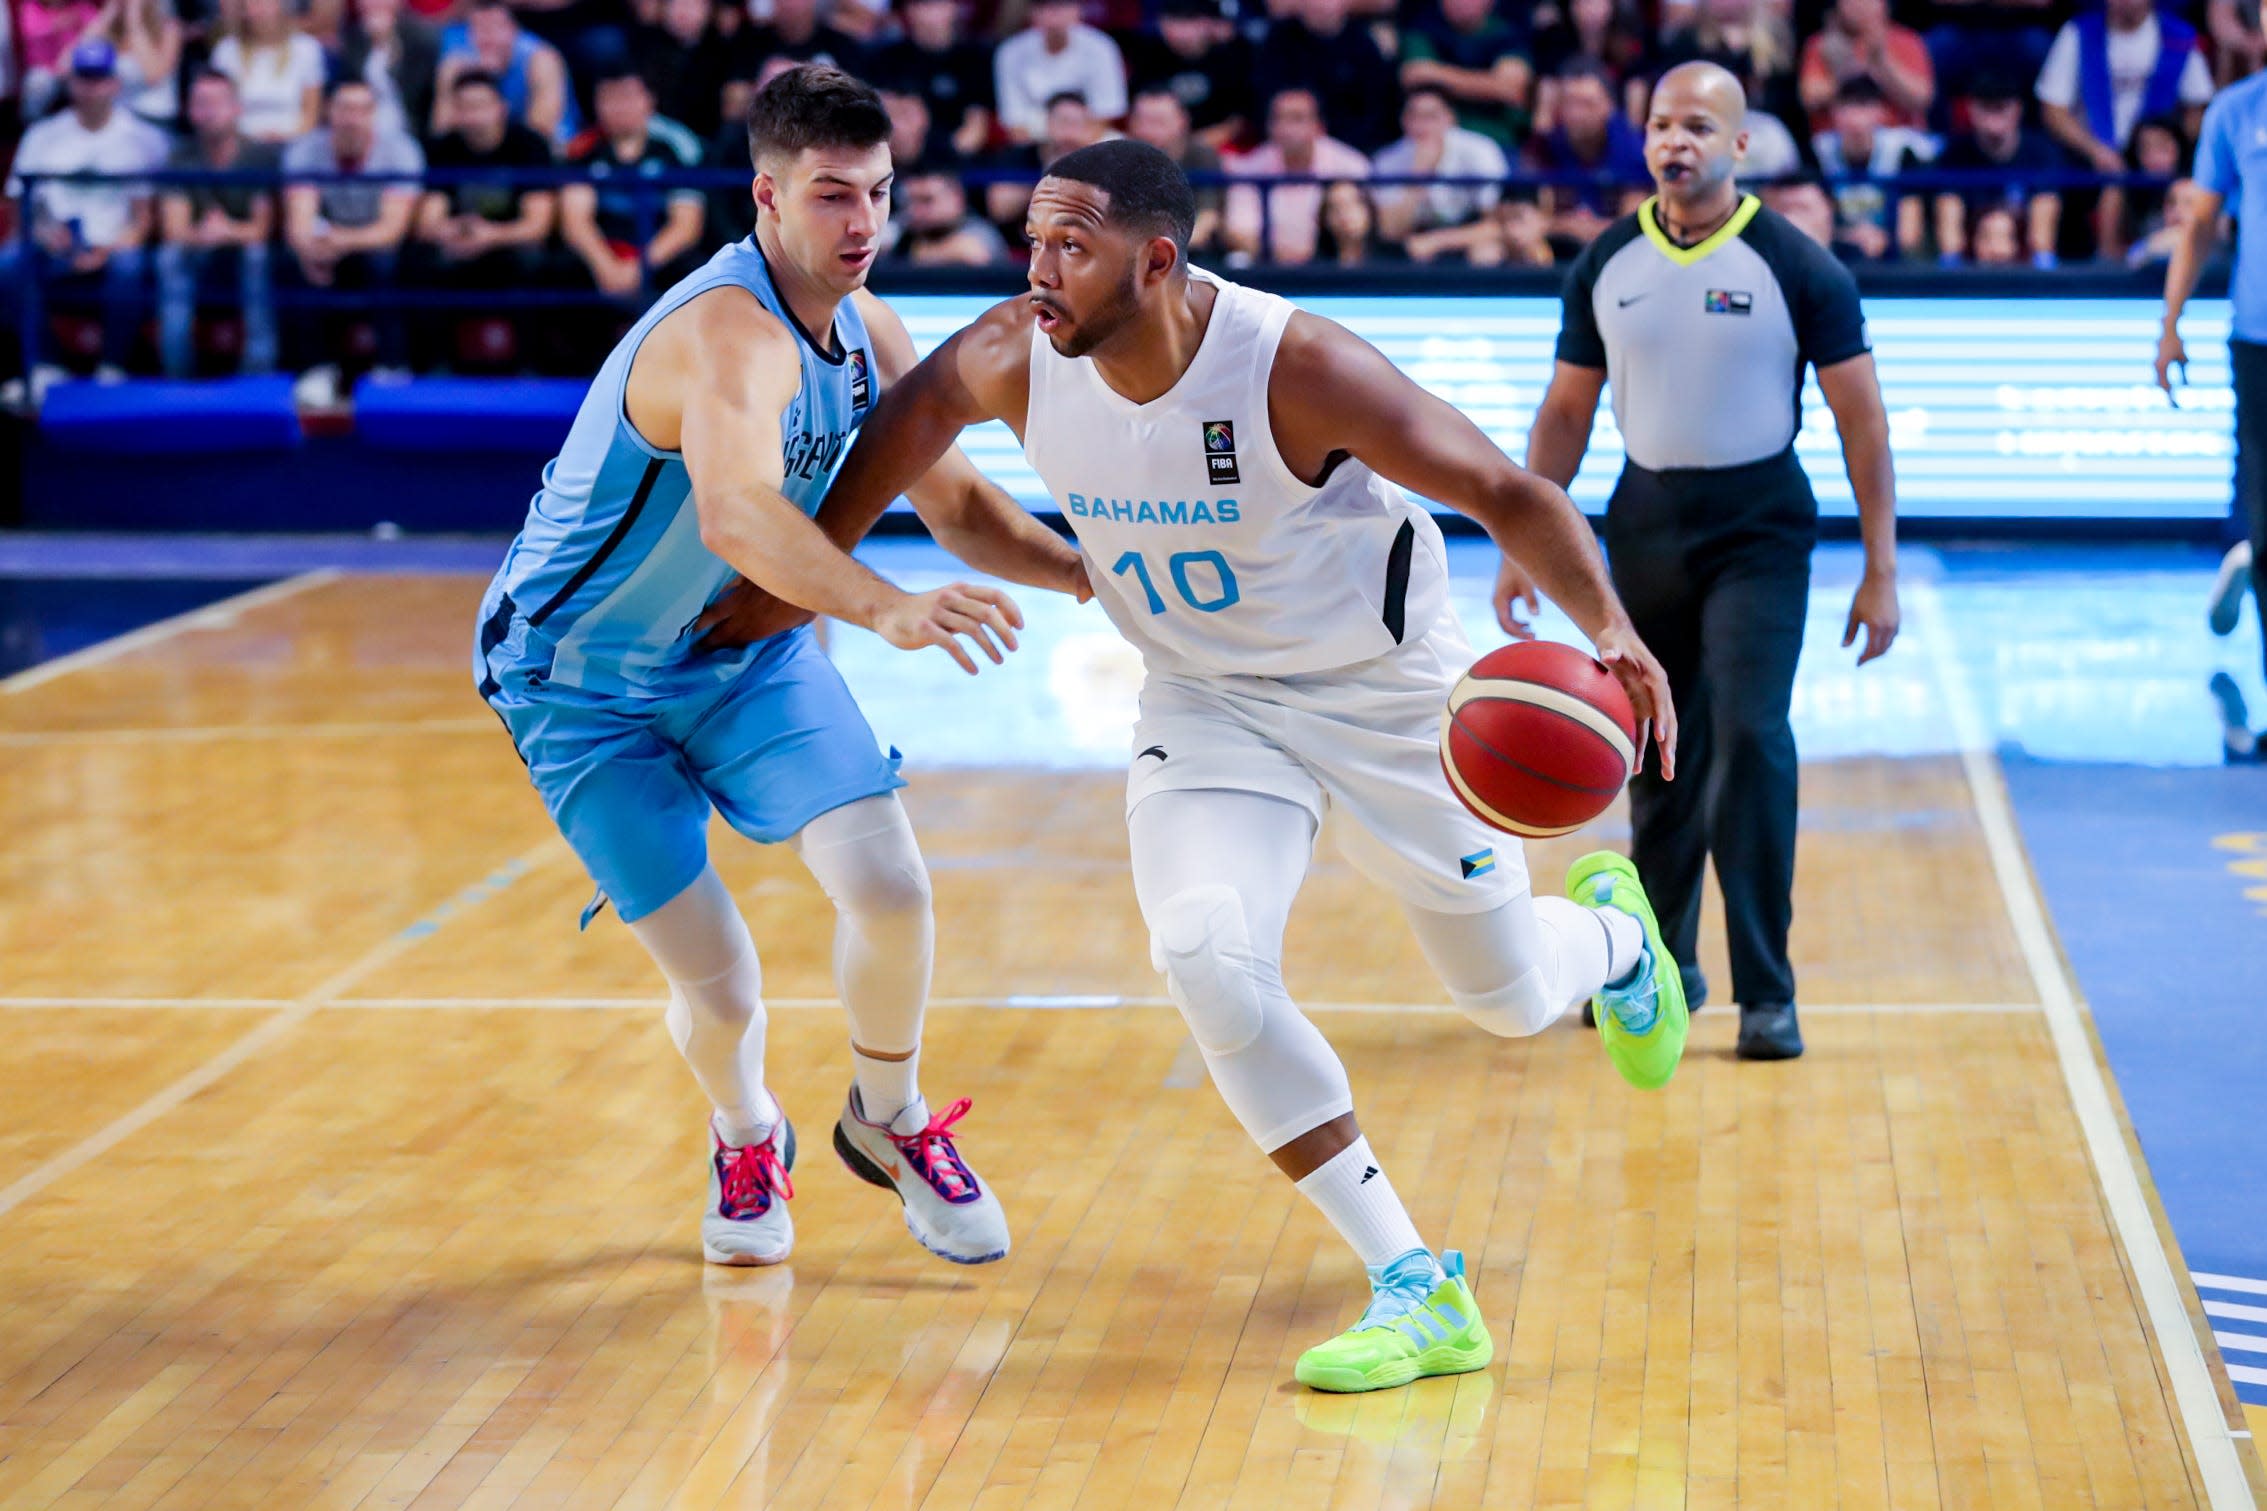 Phoenix Suns guard Eric Gordon 27 points, clutch in Bahamas' win vs. Argentina in title game